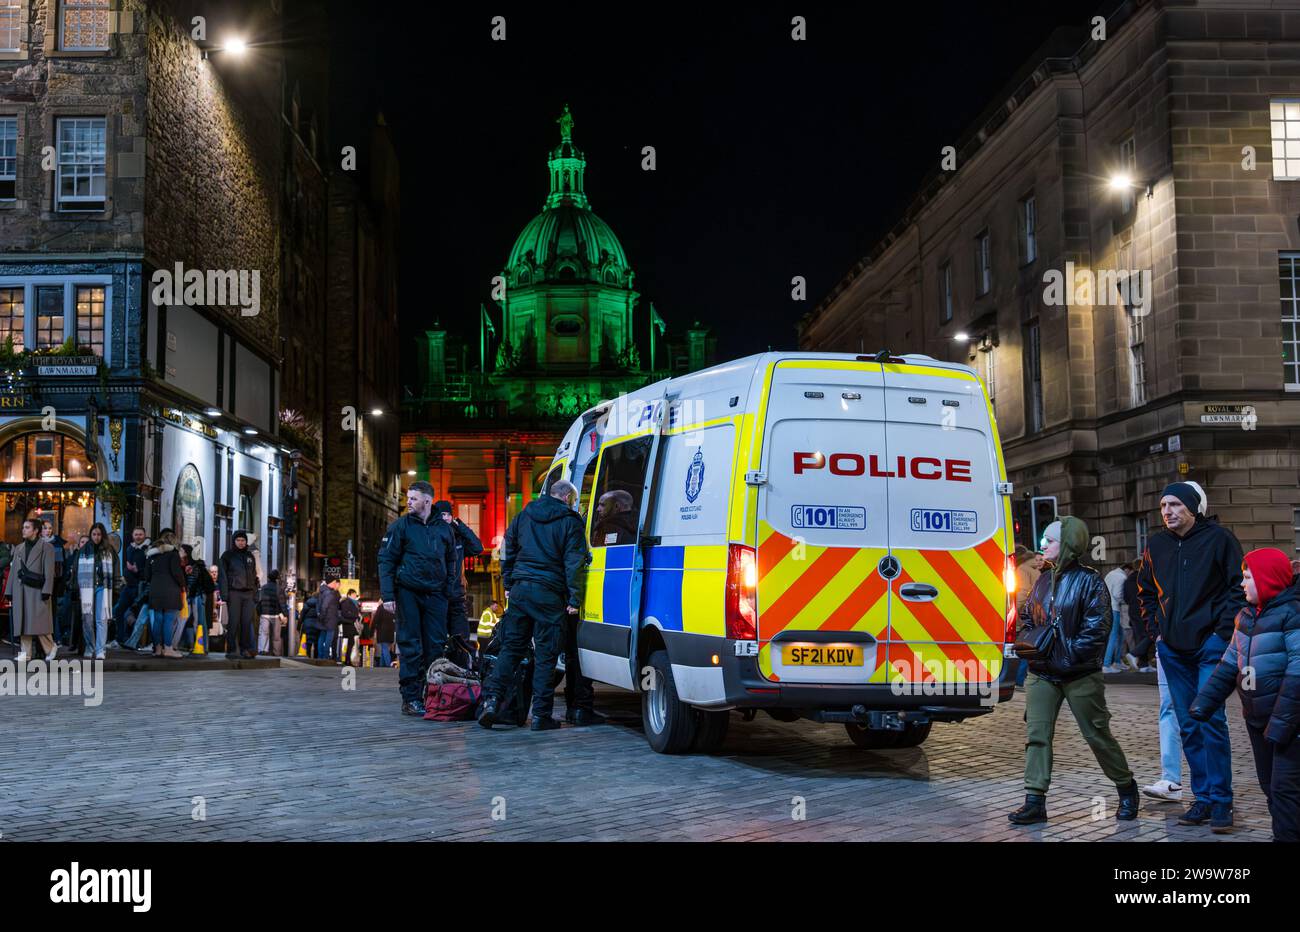 Police officers and police van incident on Royal Mile at night, Edinburgh, Scotland, UK Stock Photo